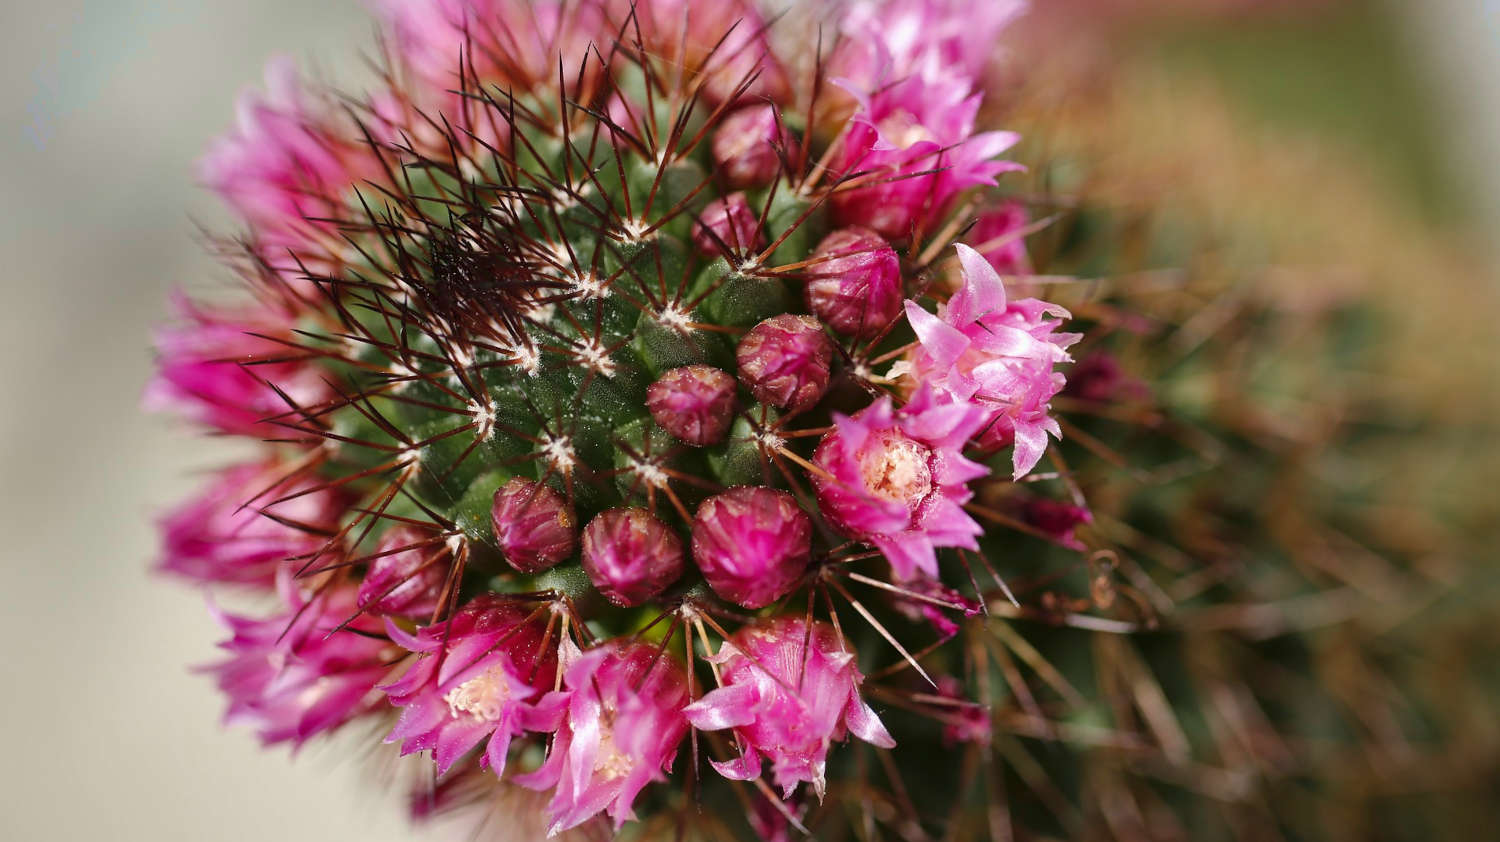 Cactus With Pink Flowers